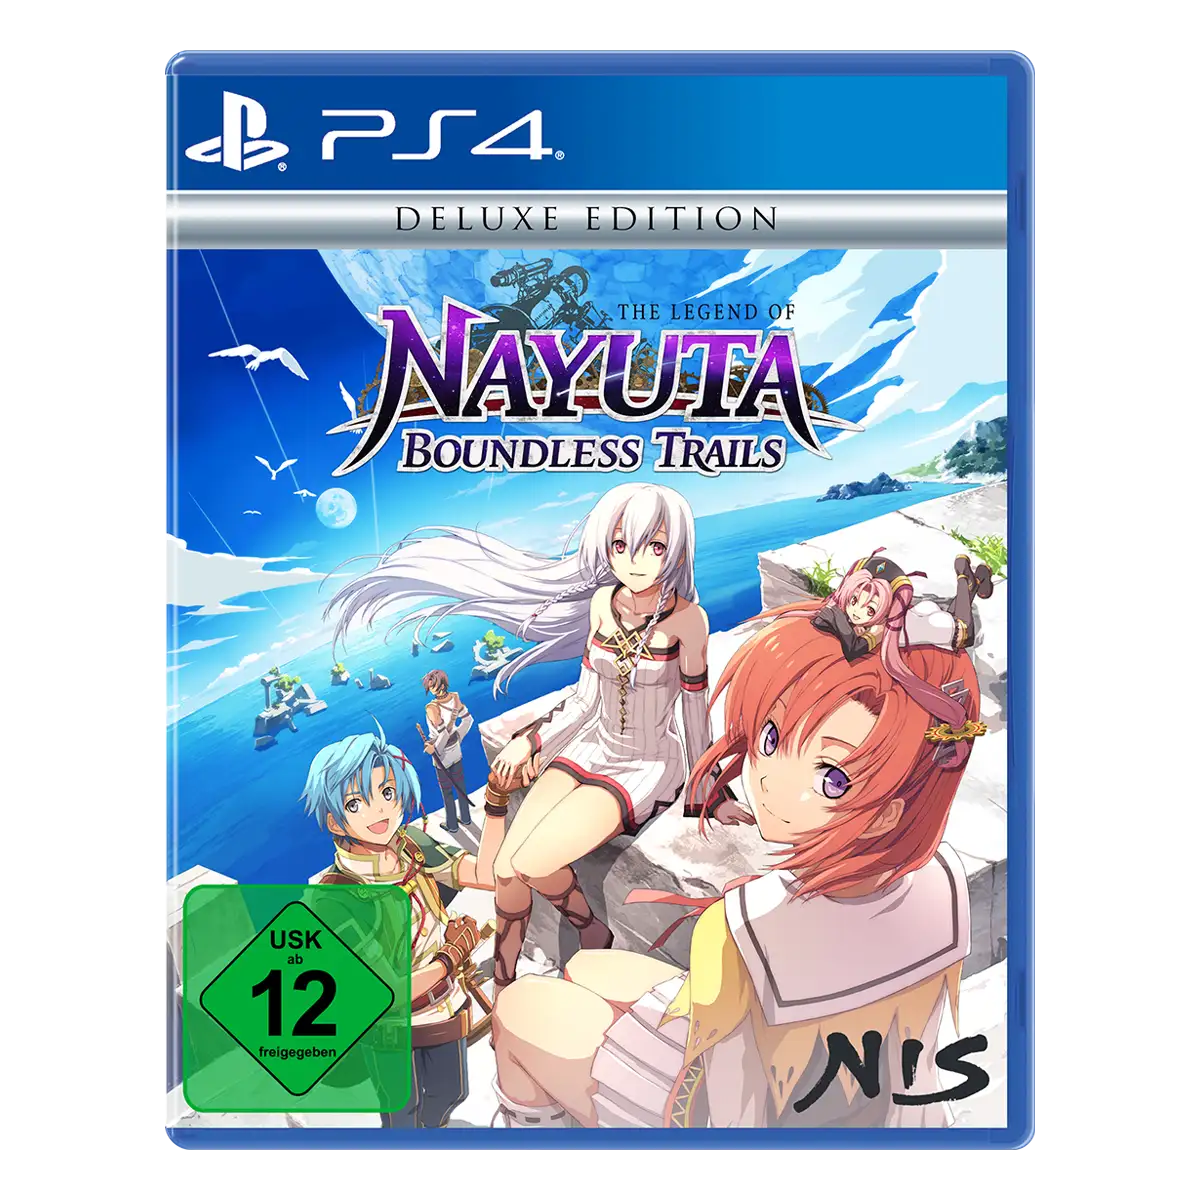 The Legend of Nayuta: Boundless Trails (PS4) Thumbnail 1